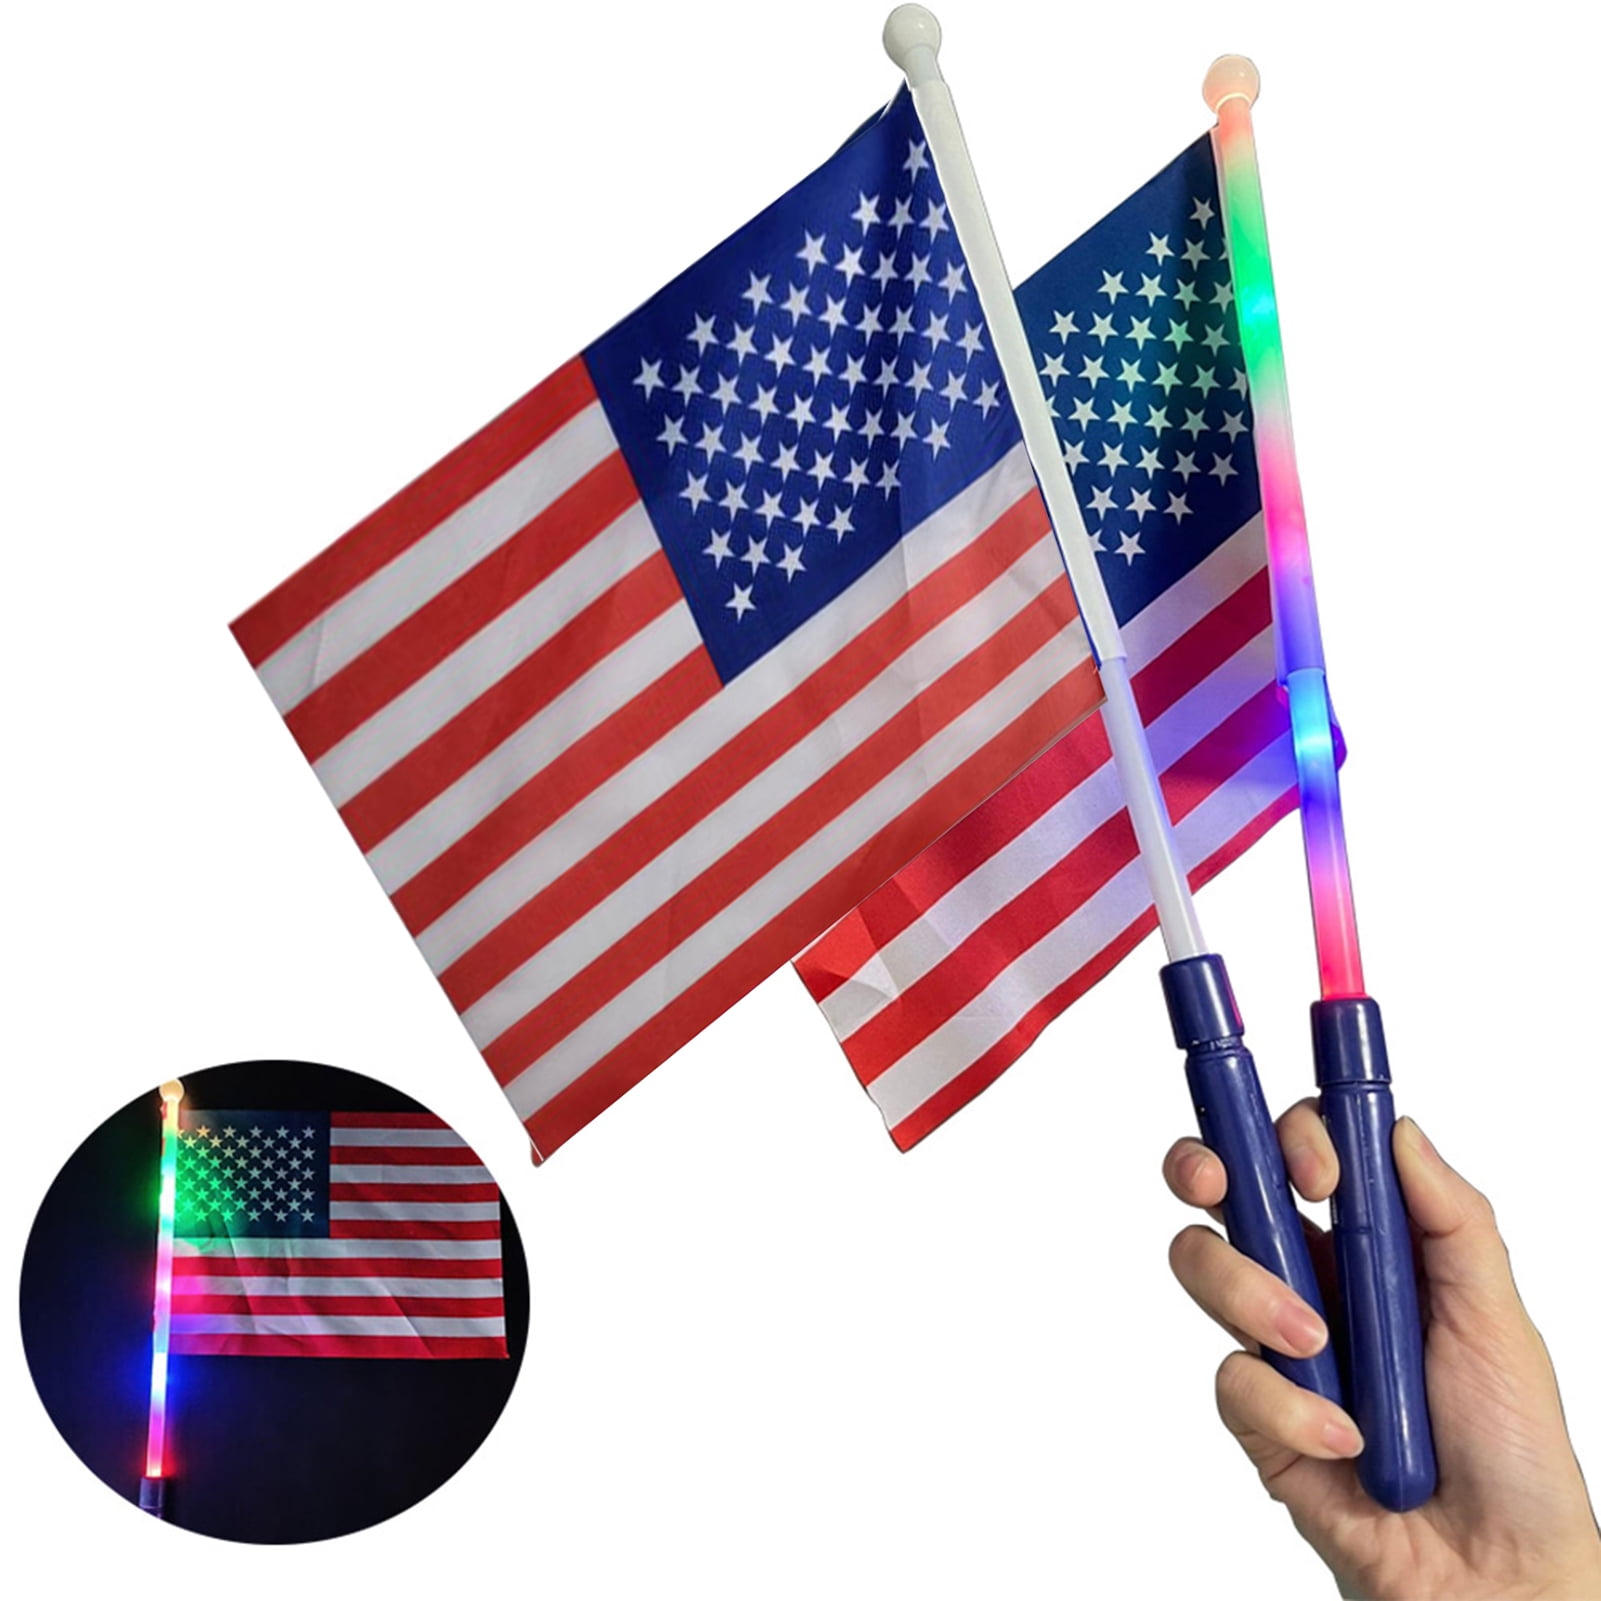 Bluethy Glowing Flag Handheld Holiday Decoration Color LED Luminous Mini American Stick for Independence Day -